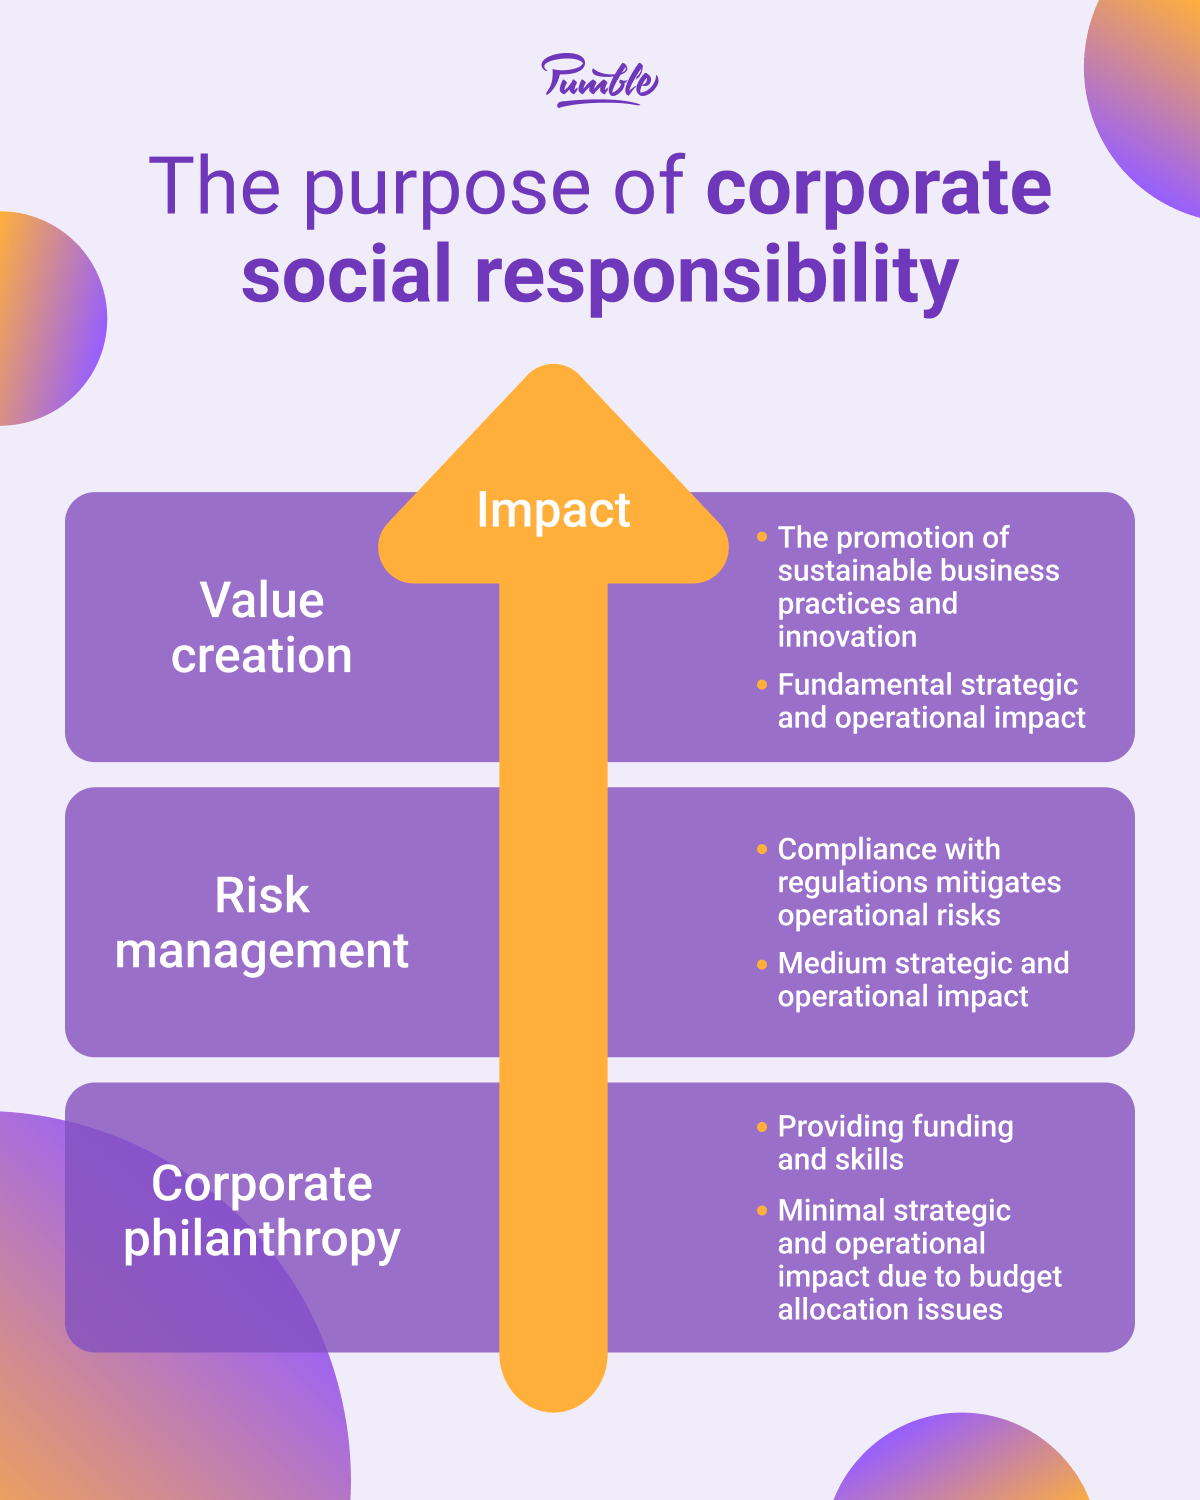 The purpose of corporate social responsibility